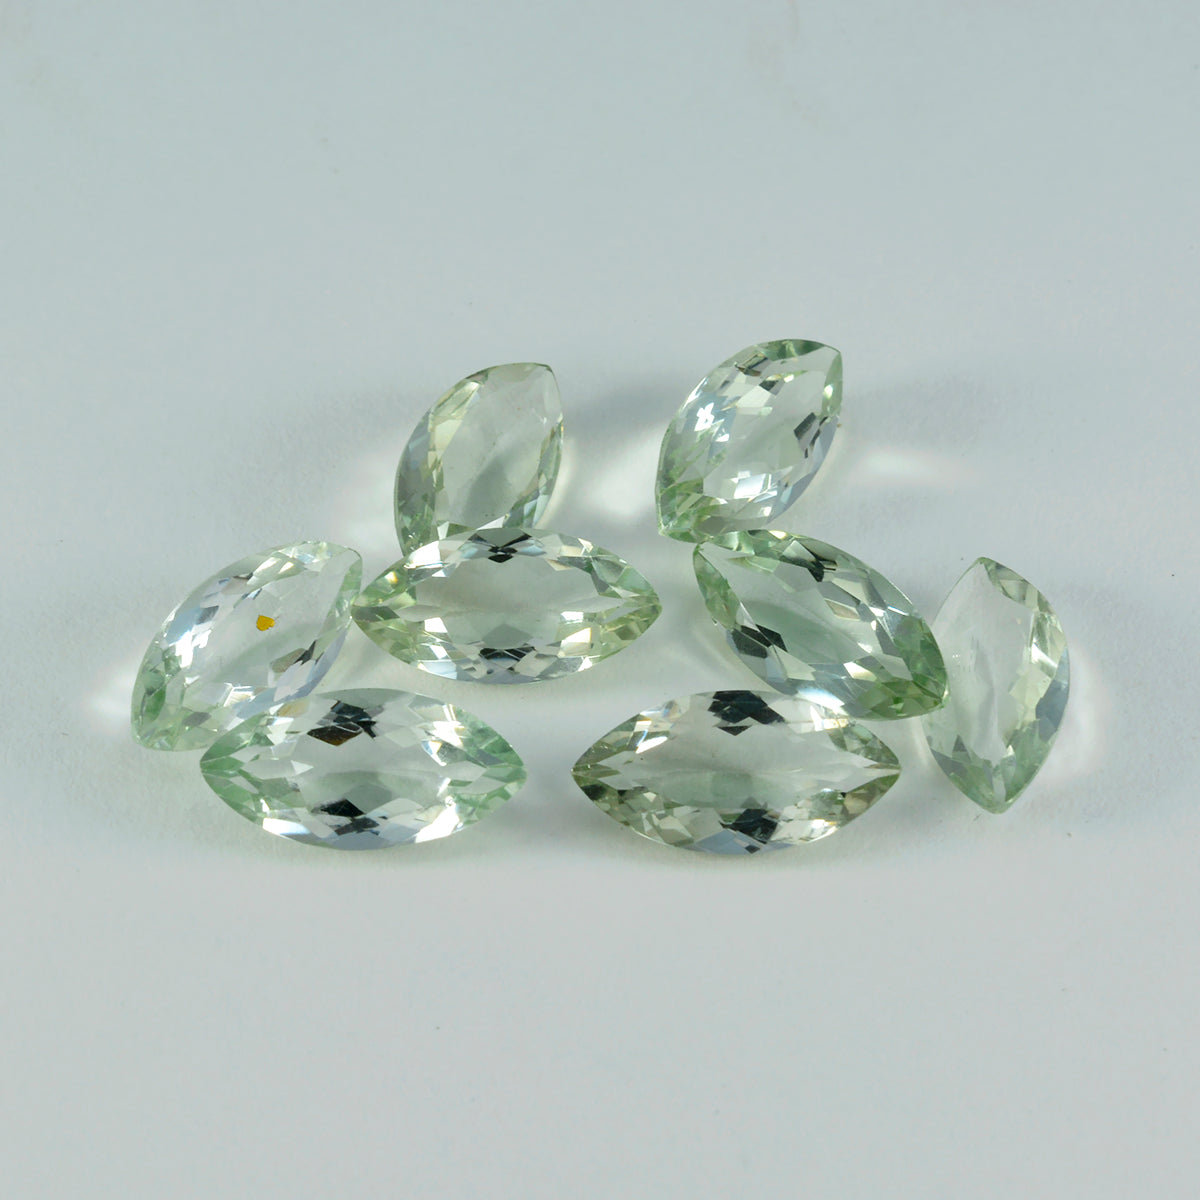 Riyogems 1PC Green Amethyst Faceted 8x16 mm Marquise Shape lovely Quality Loose Gems